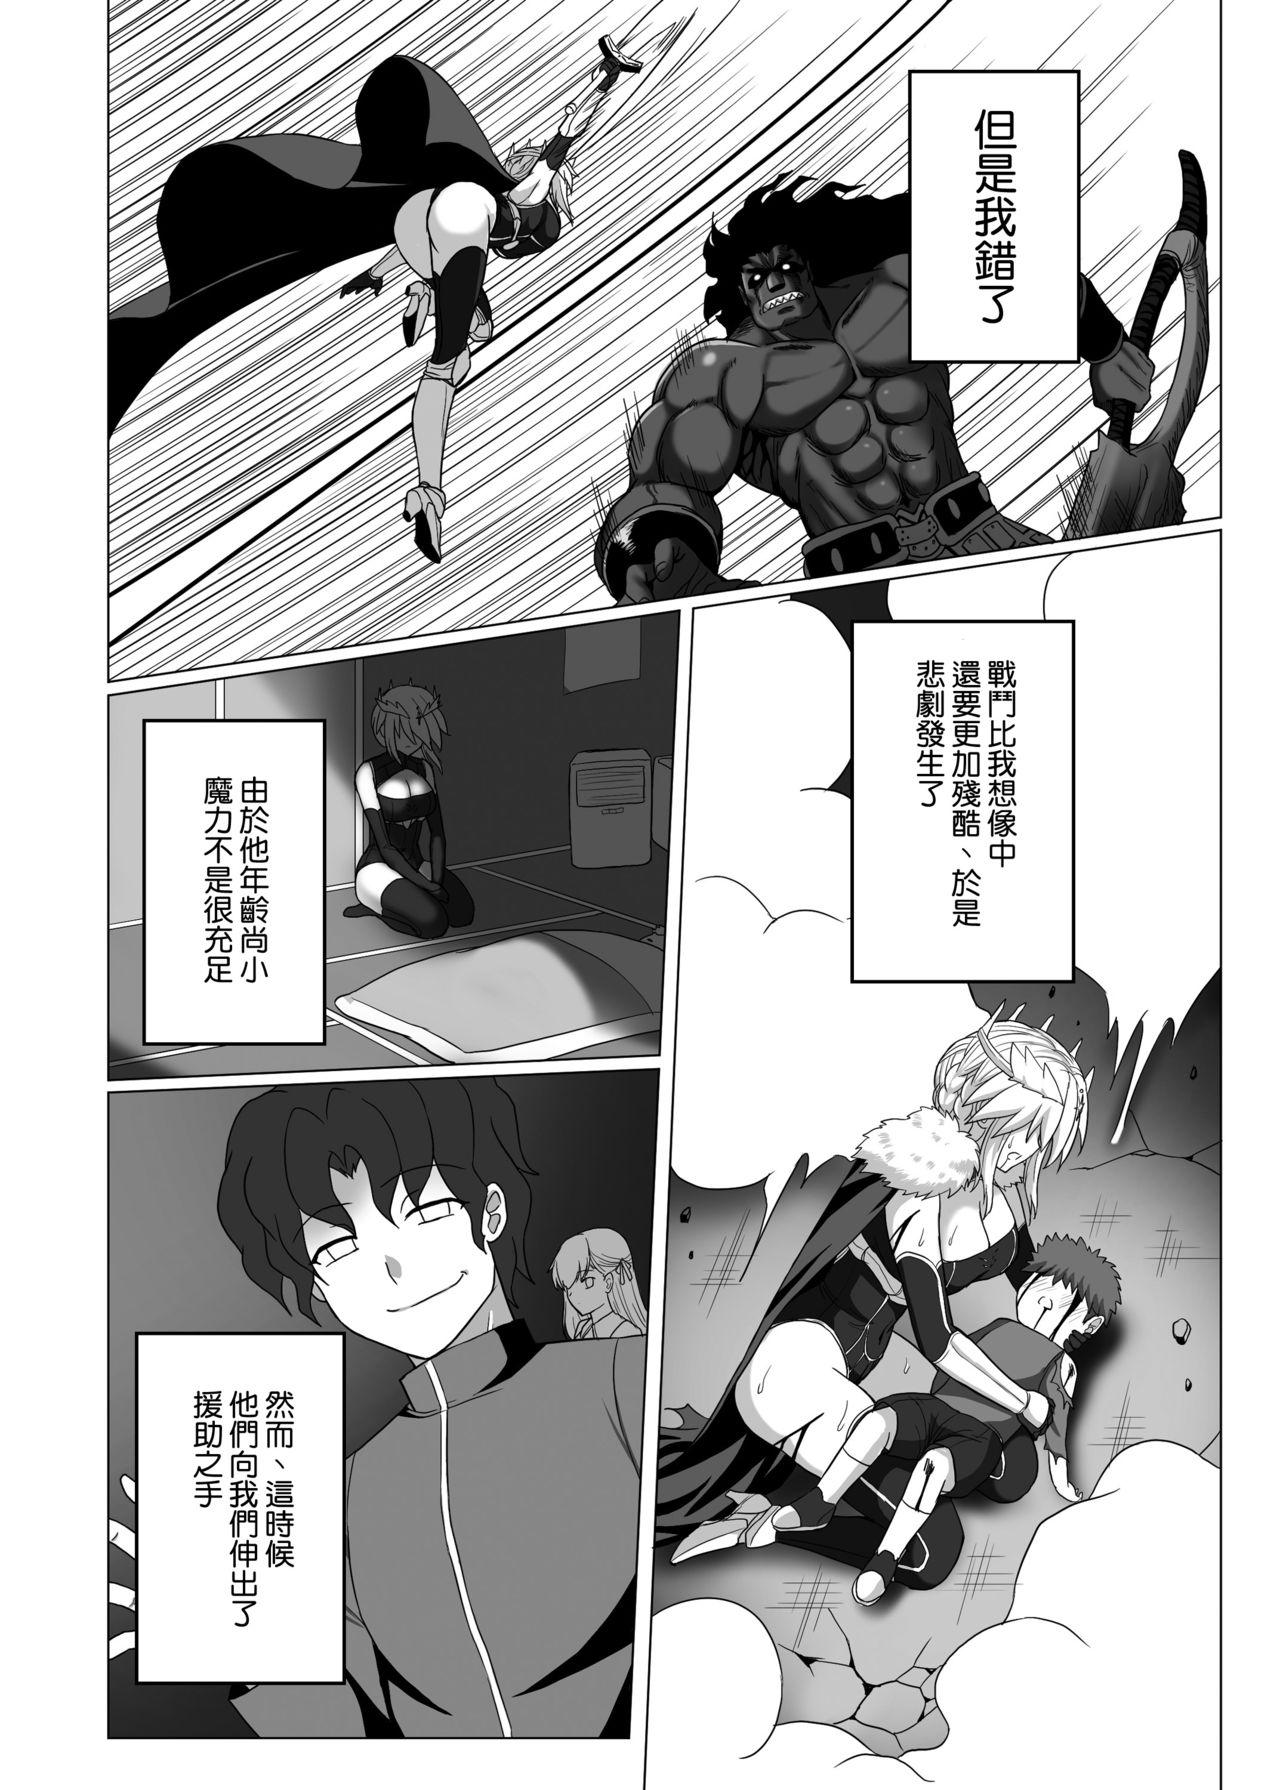 Amature Fate/NTR - Fate grand order Asian Babes - Page 6